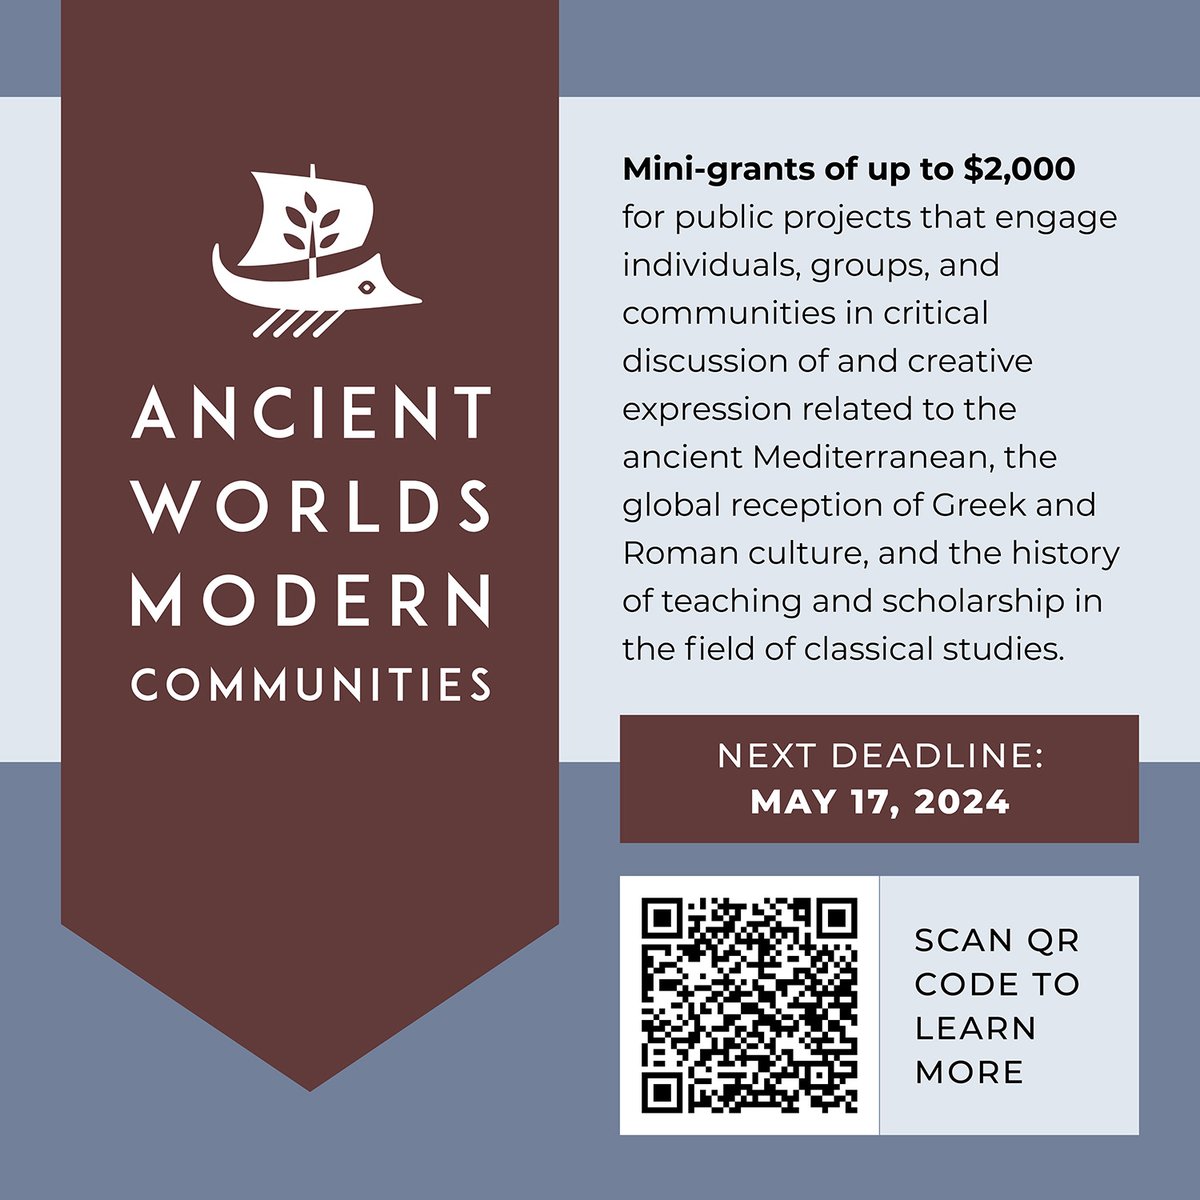 The Ancient Worlds, Modern Communities initiative provides mini-grants of up to $2,000 to support public engagement projects. The next deadline is May 17, 2024! classicalstudies.org/outreach/ancie…